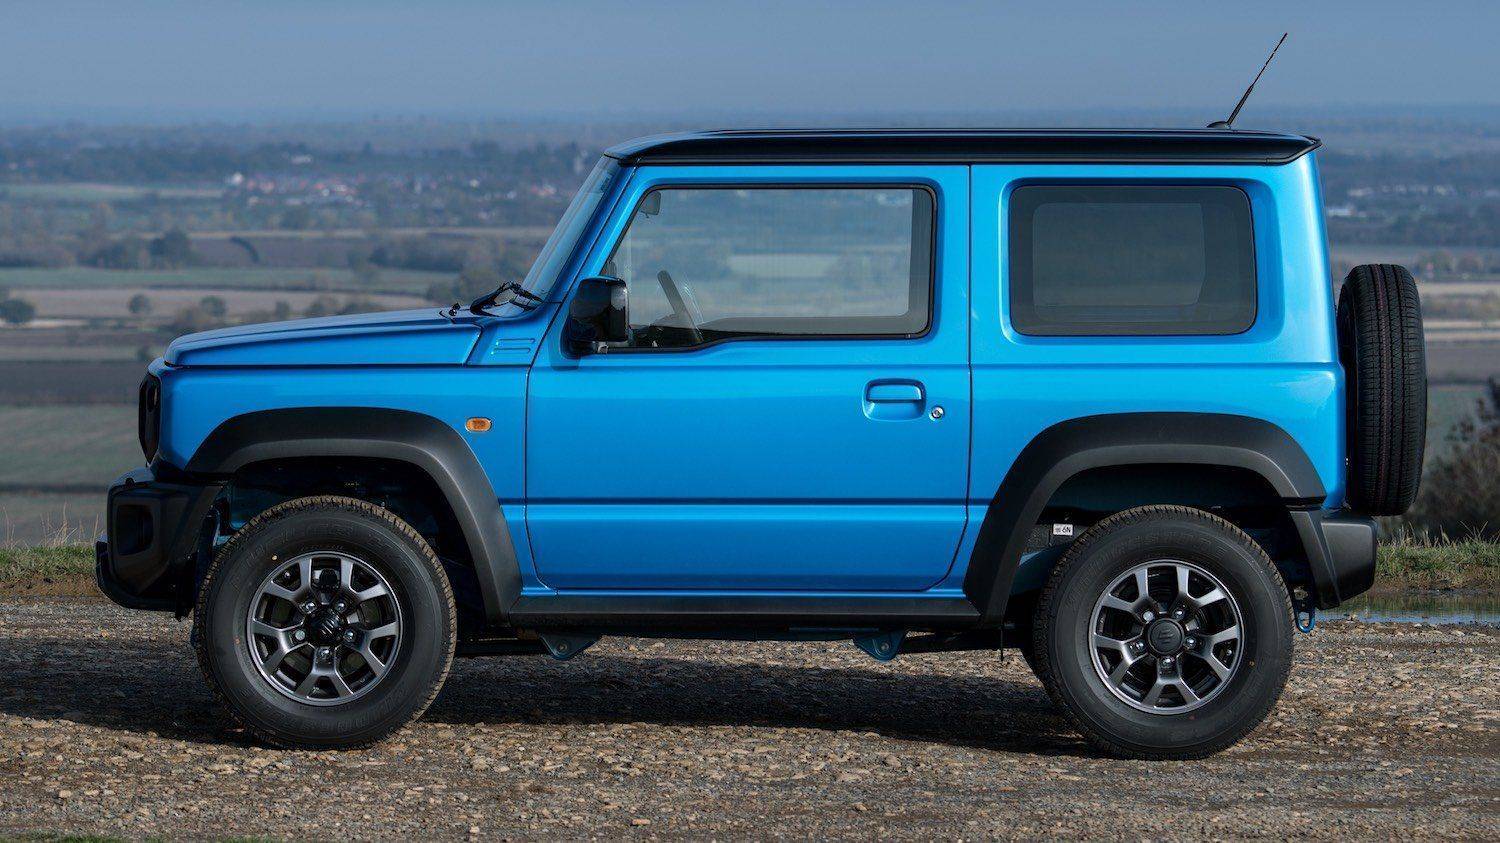 -Scanlan-takes-the-All-New-Jimny-on-and-off-road-5.jpg